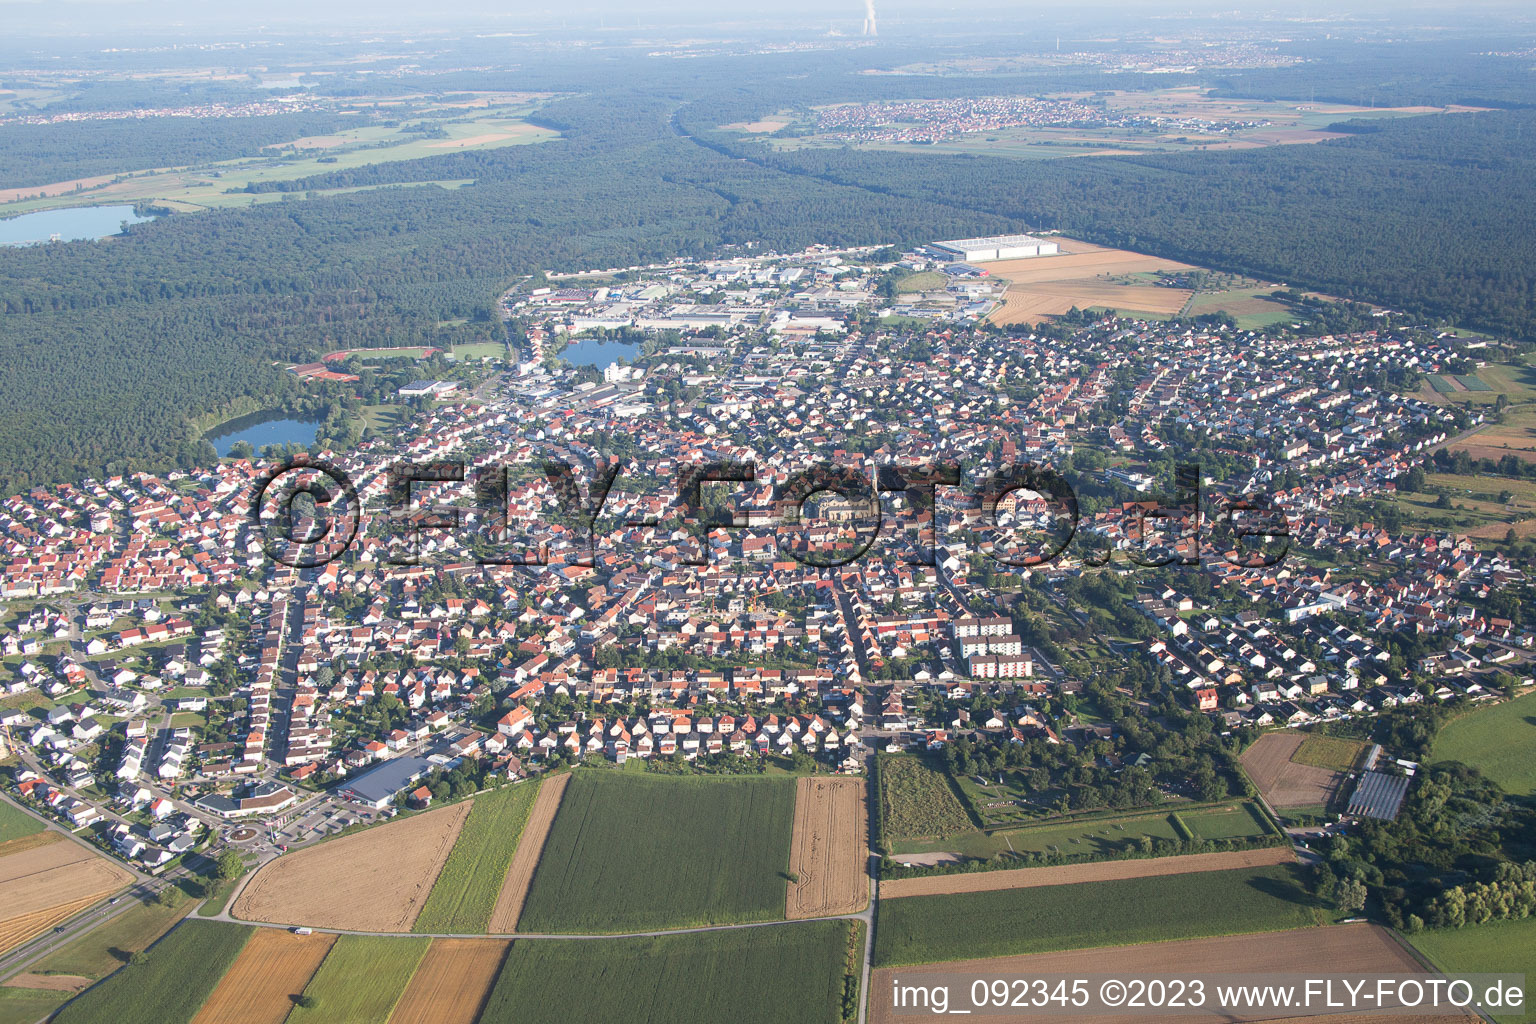 Forst in the state Baden-Wuerttemberg, Germany seen from a drone